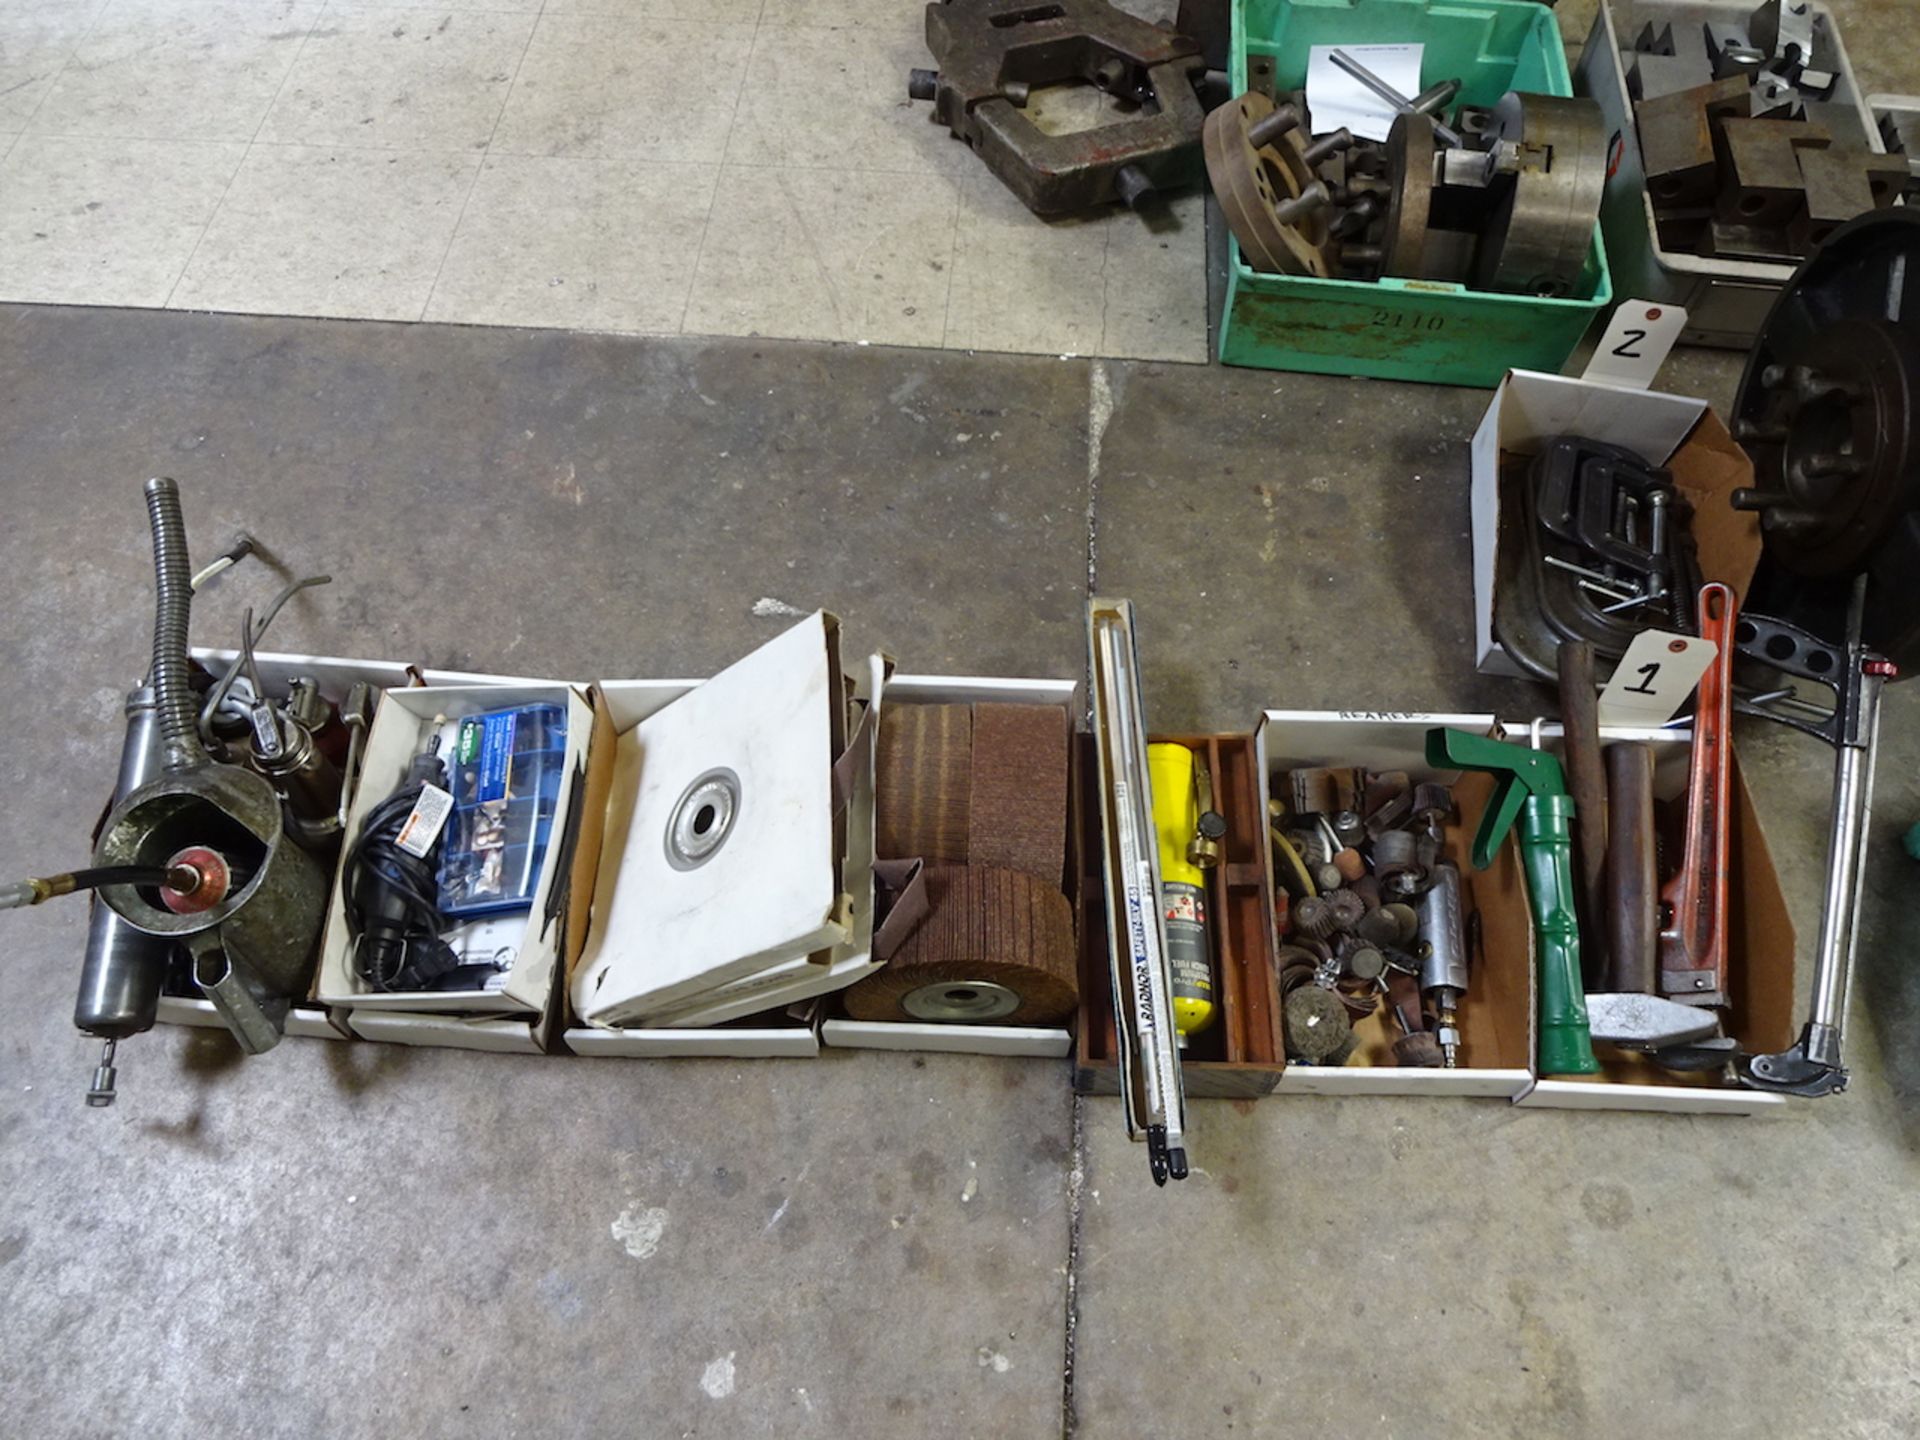 LOT: ASSORTED HAND TOOLS INCLUDING DREMEL, OIL CANS, AIR TOOL, HAMMERS, PIPE WRENCH, ETC.